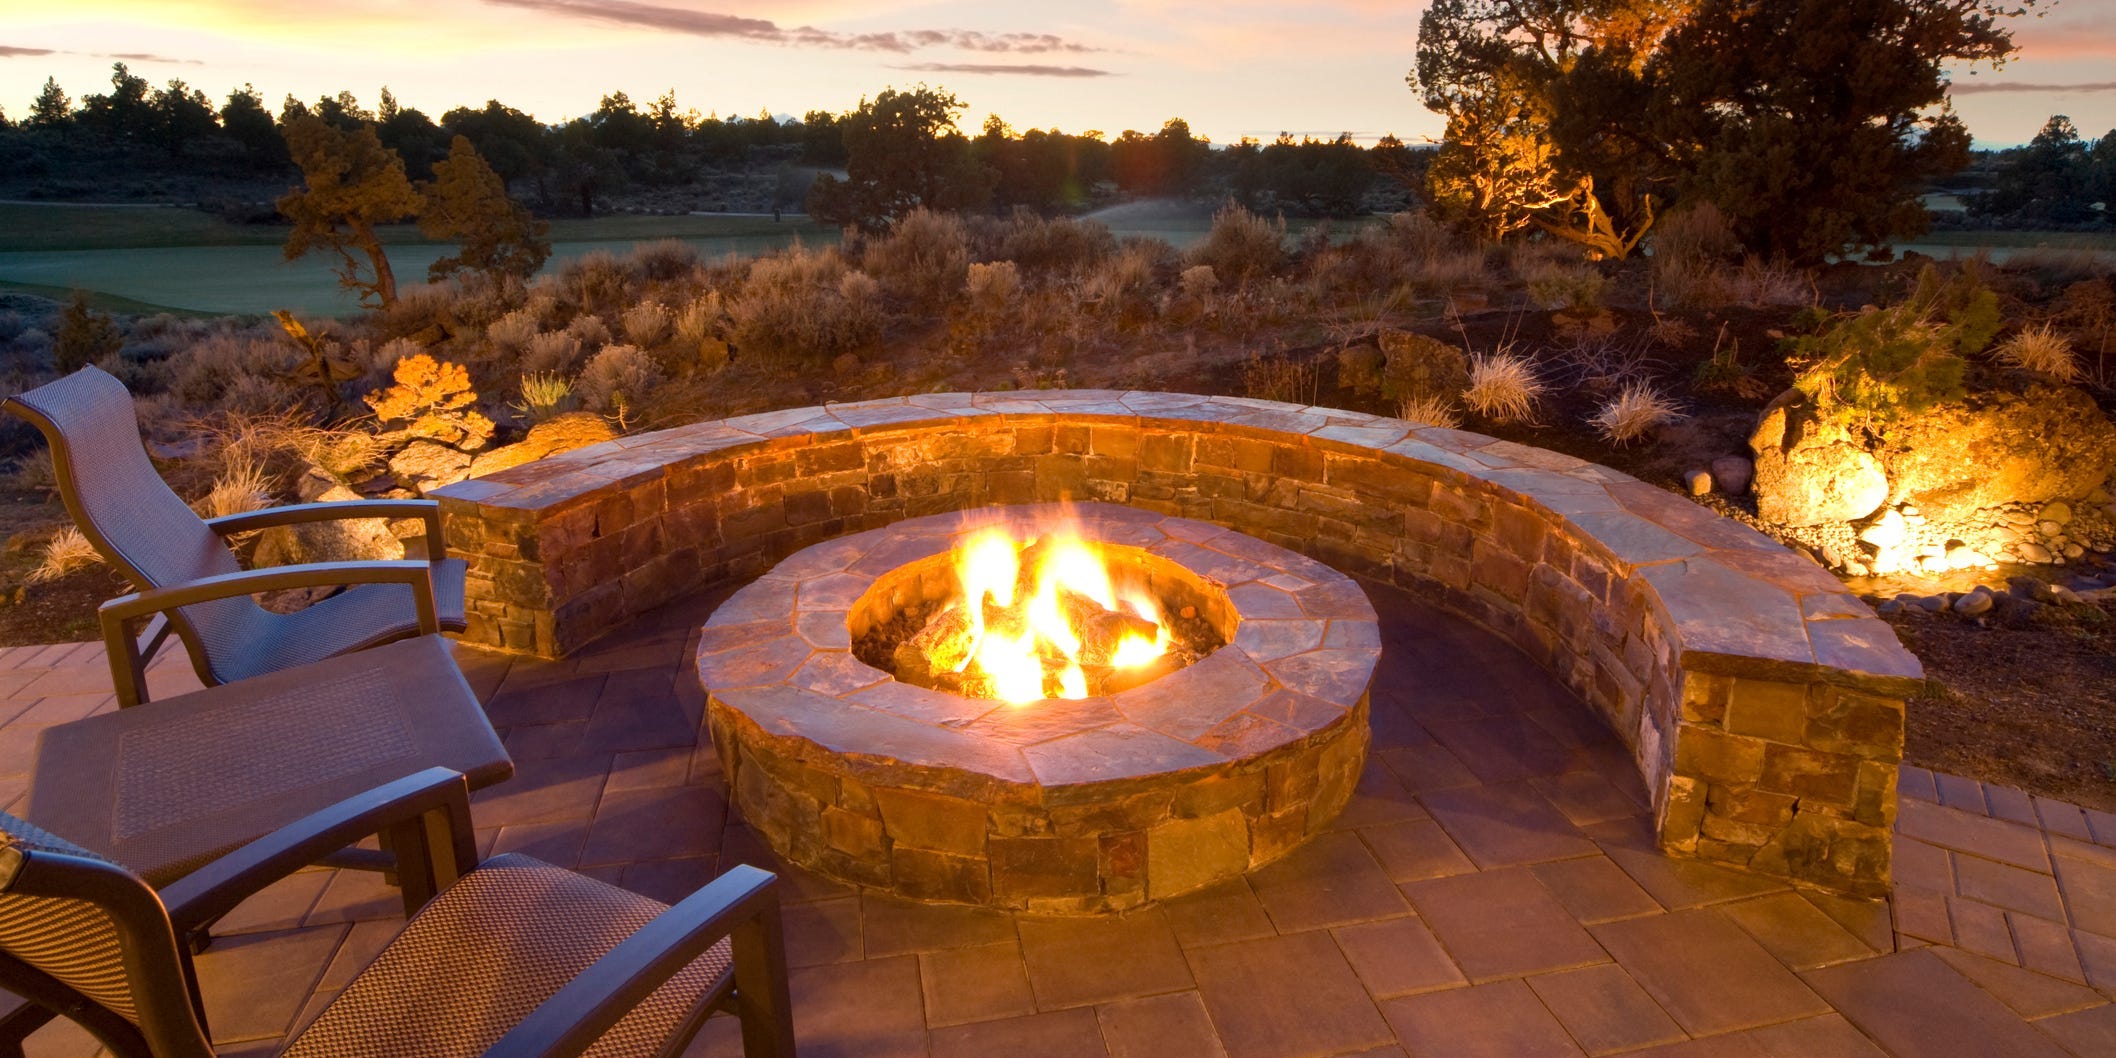 A backyard fire pit with a fire burning in it, surrounded by a stone knee wall and chairs